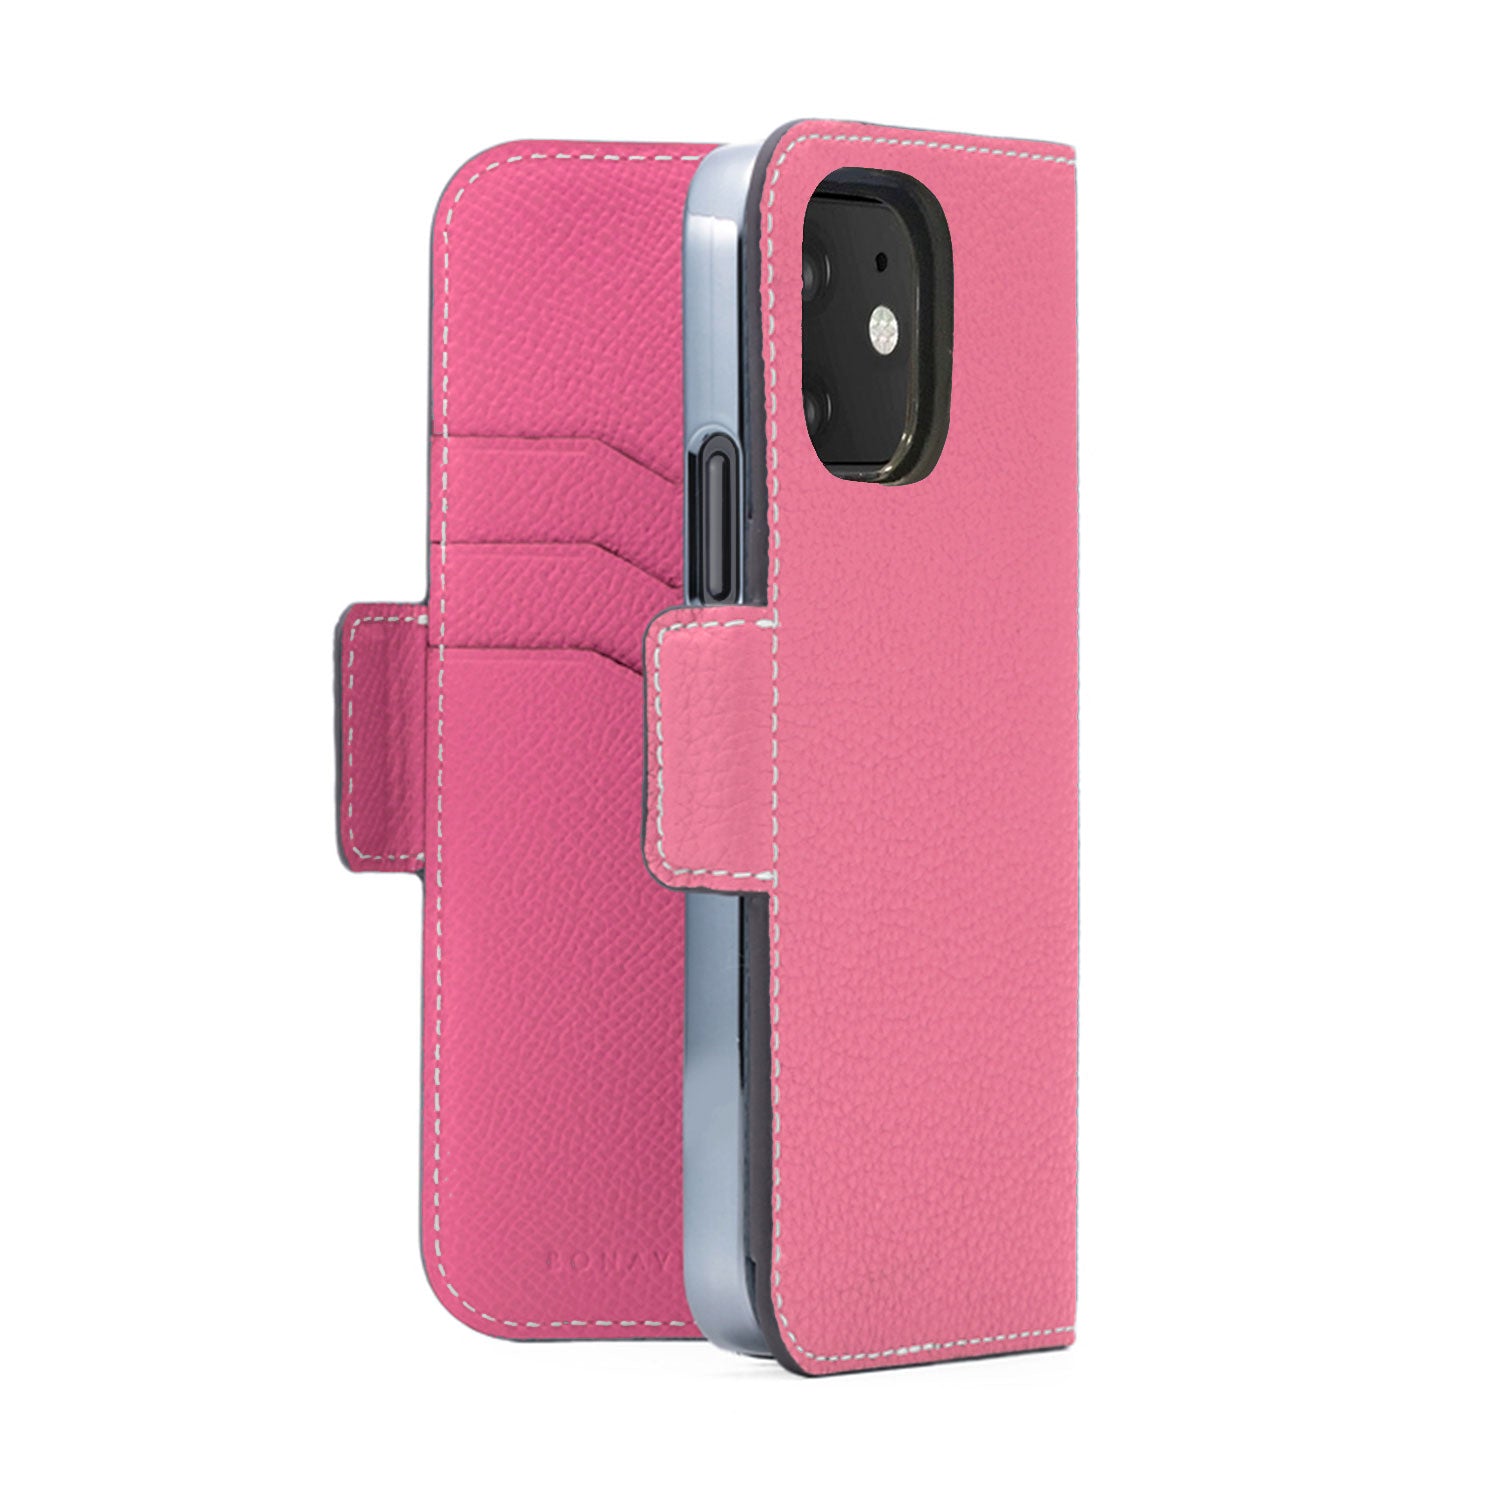 (iPhone 12 mini) Stand Diary Case Shrink Leather